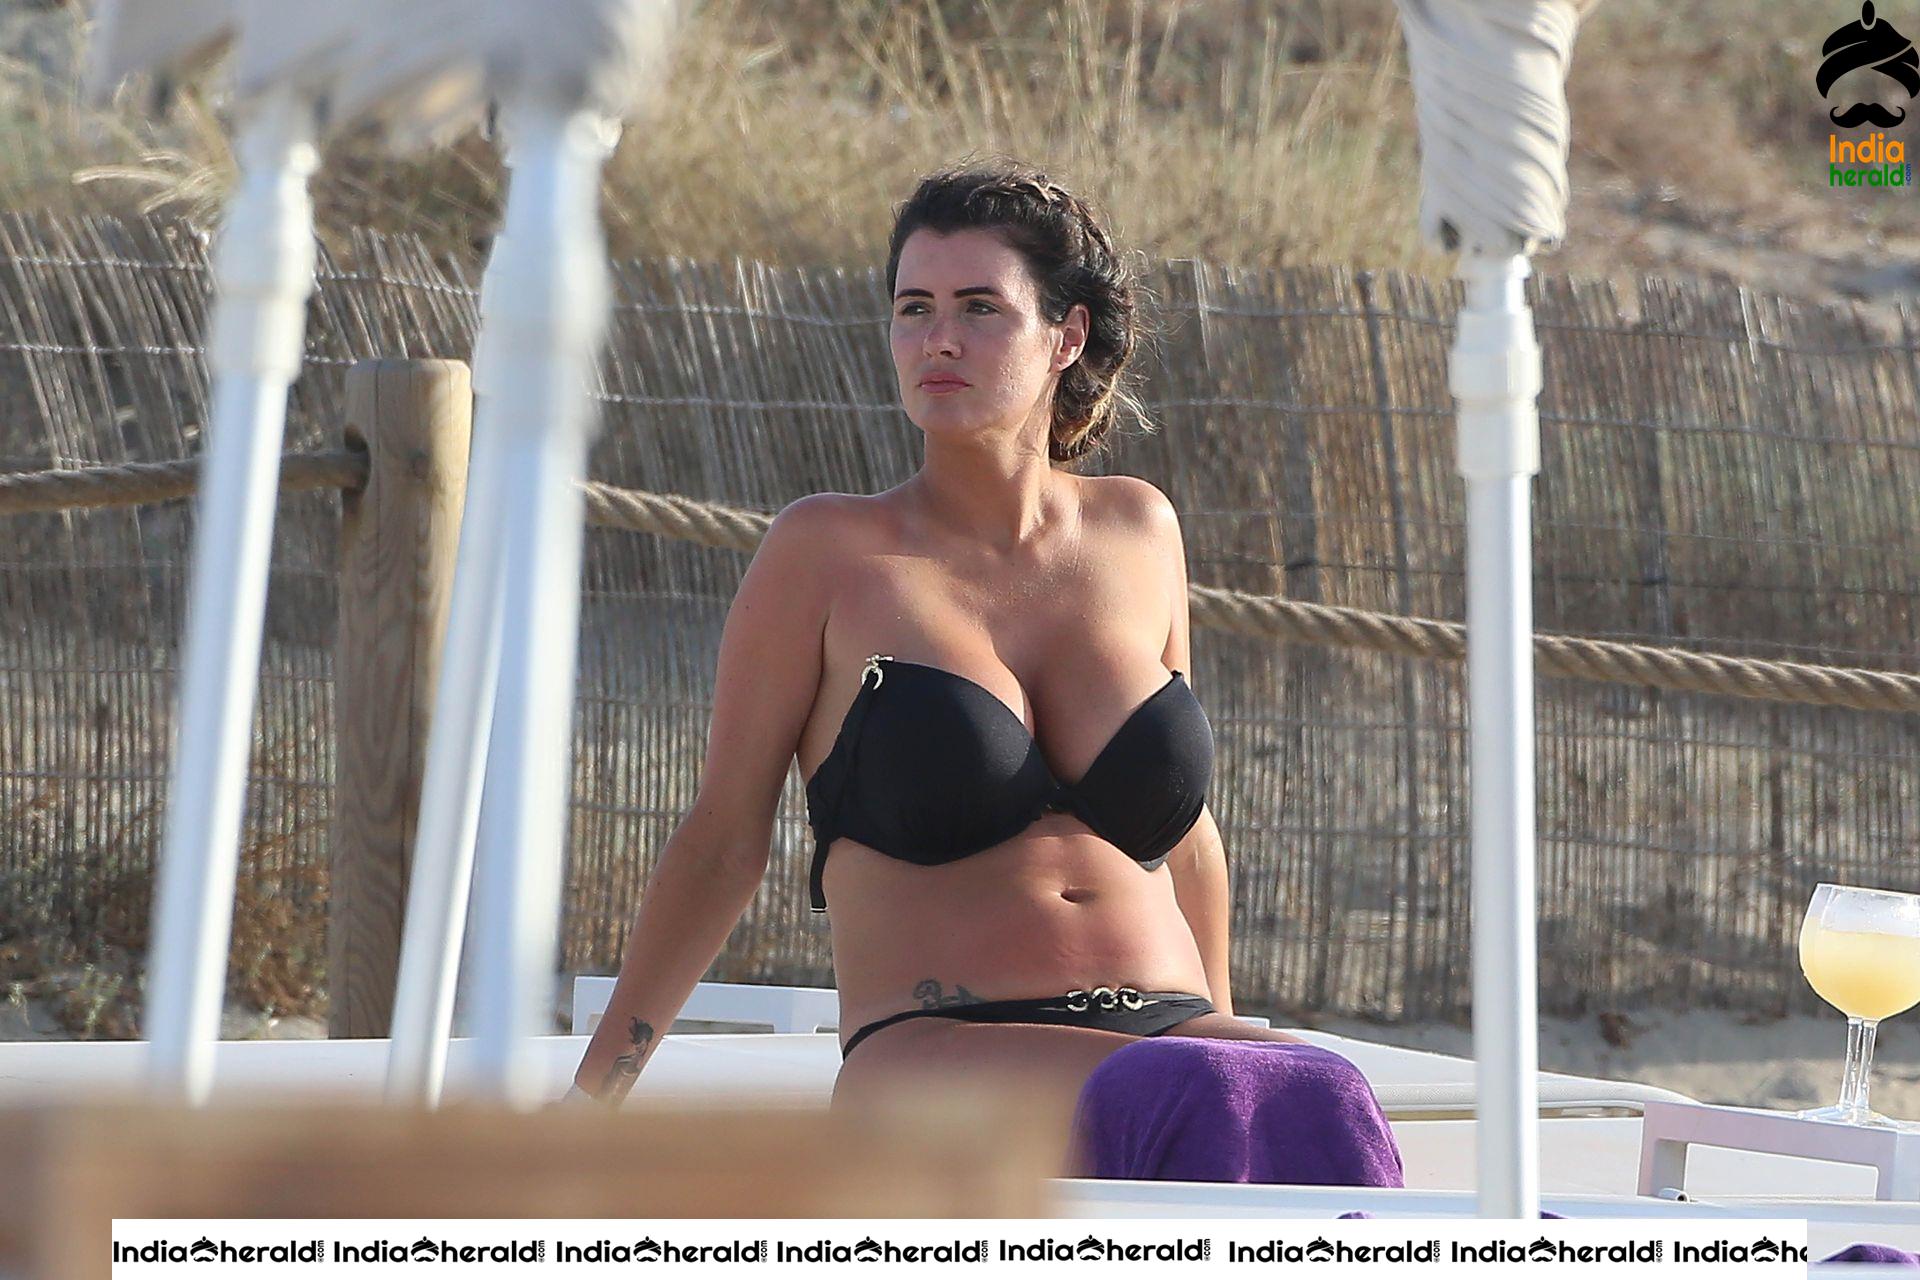 Helen Wood caught in Bikini as she exposes her Big Assets at a beach club in Ibiza Set 1